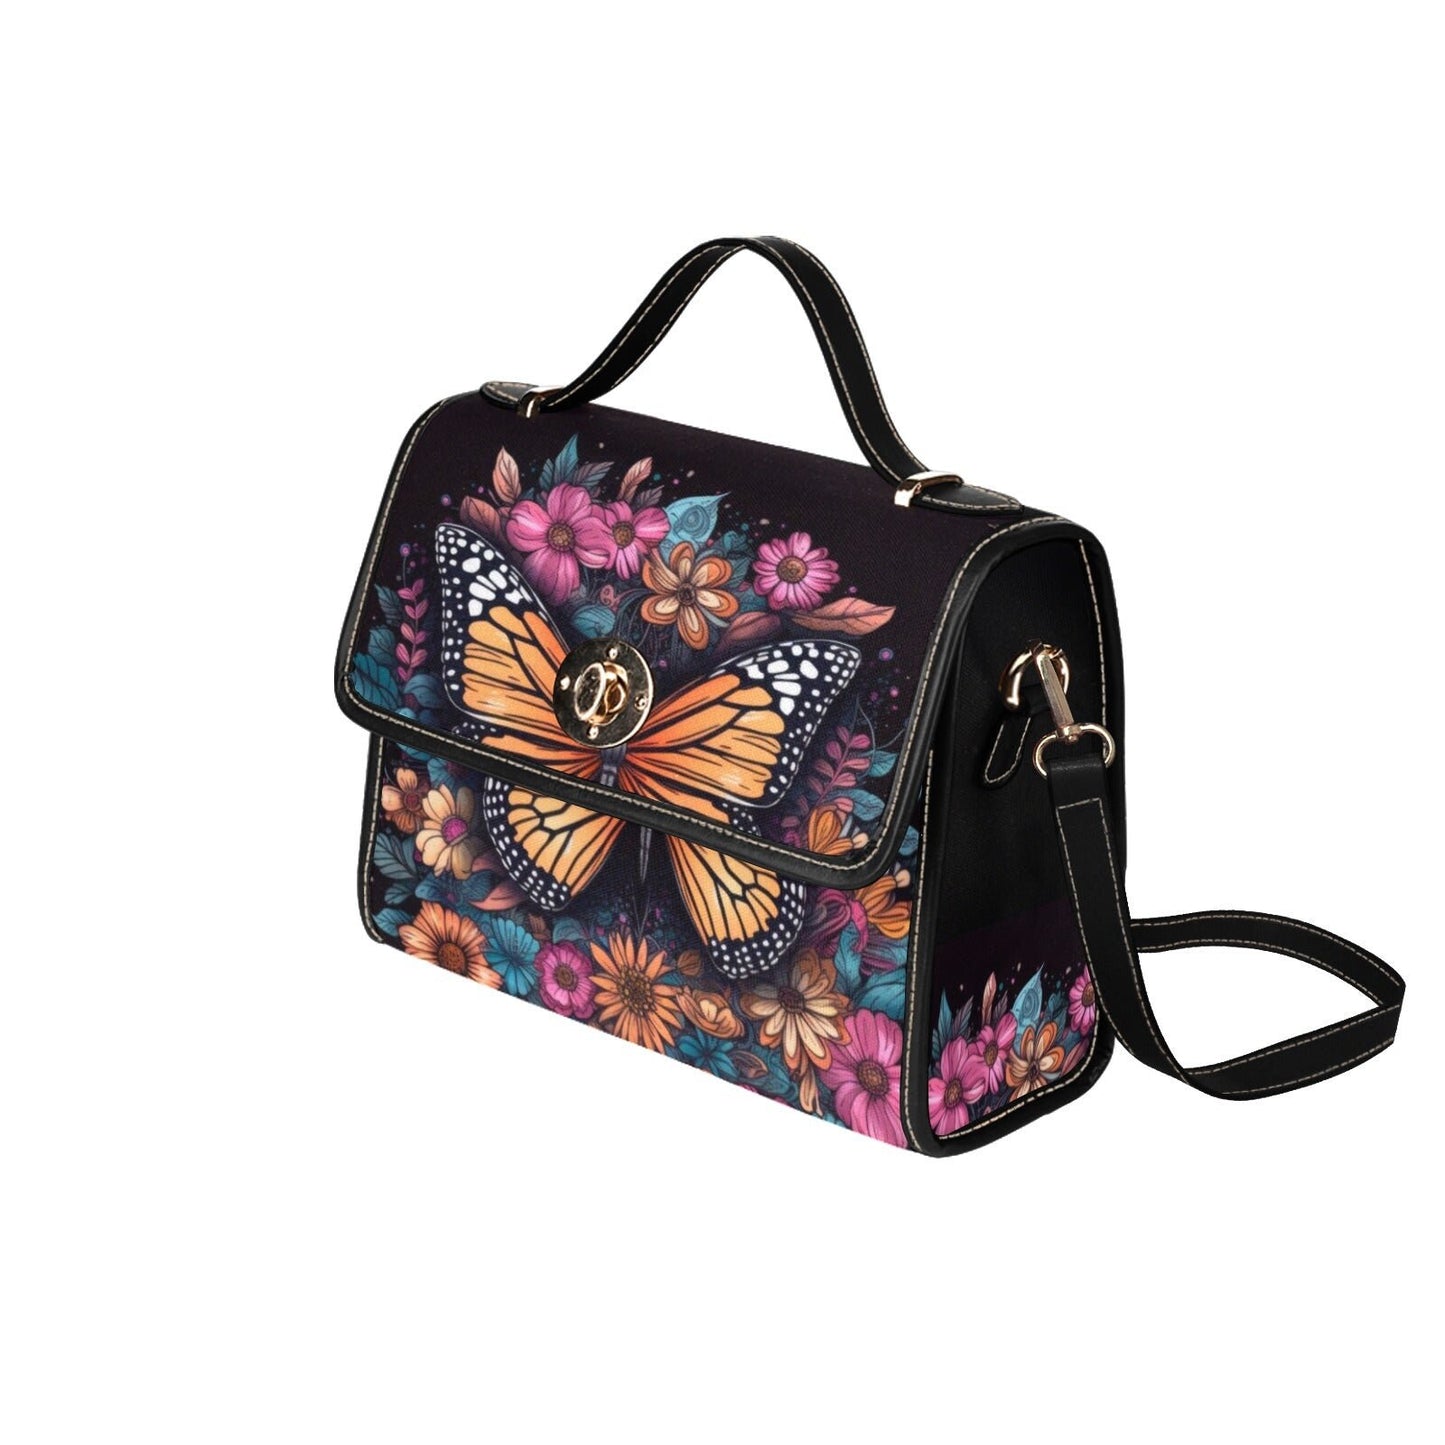 Magical Butterfly Celestial Satchel bag, Cottagecore spring forestcore crossbody purse, cute vegan leather strap goth bag hippies boho gift